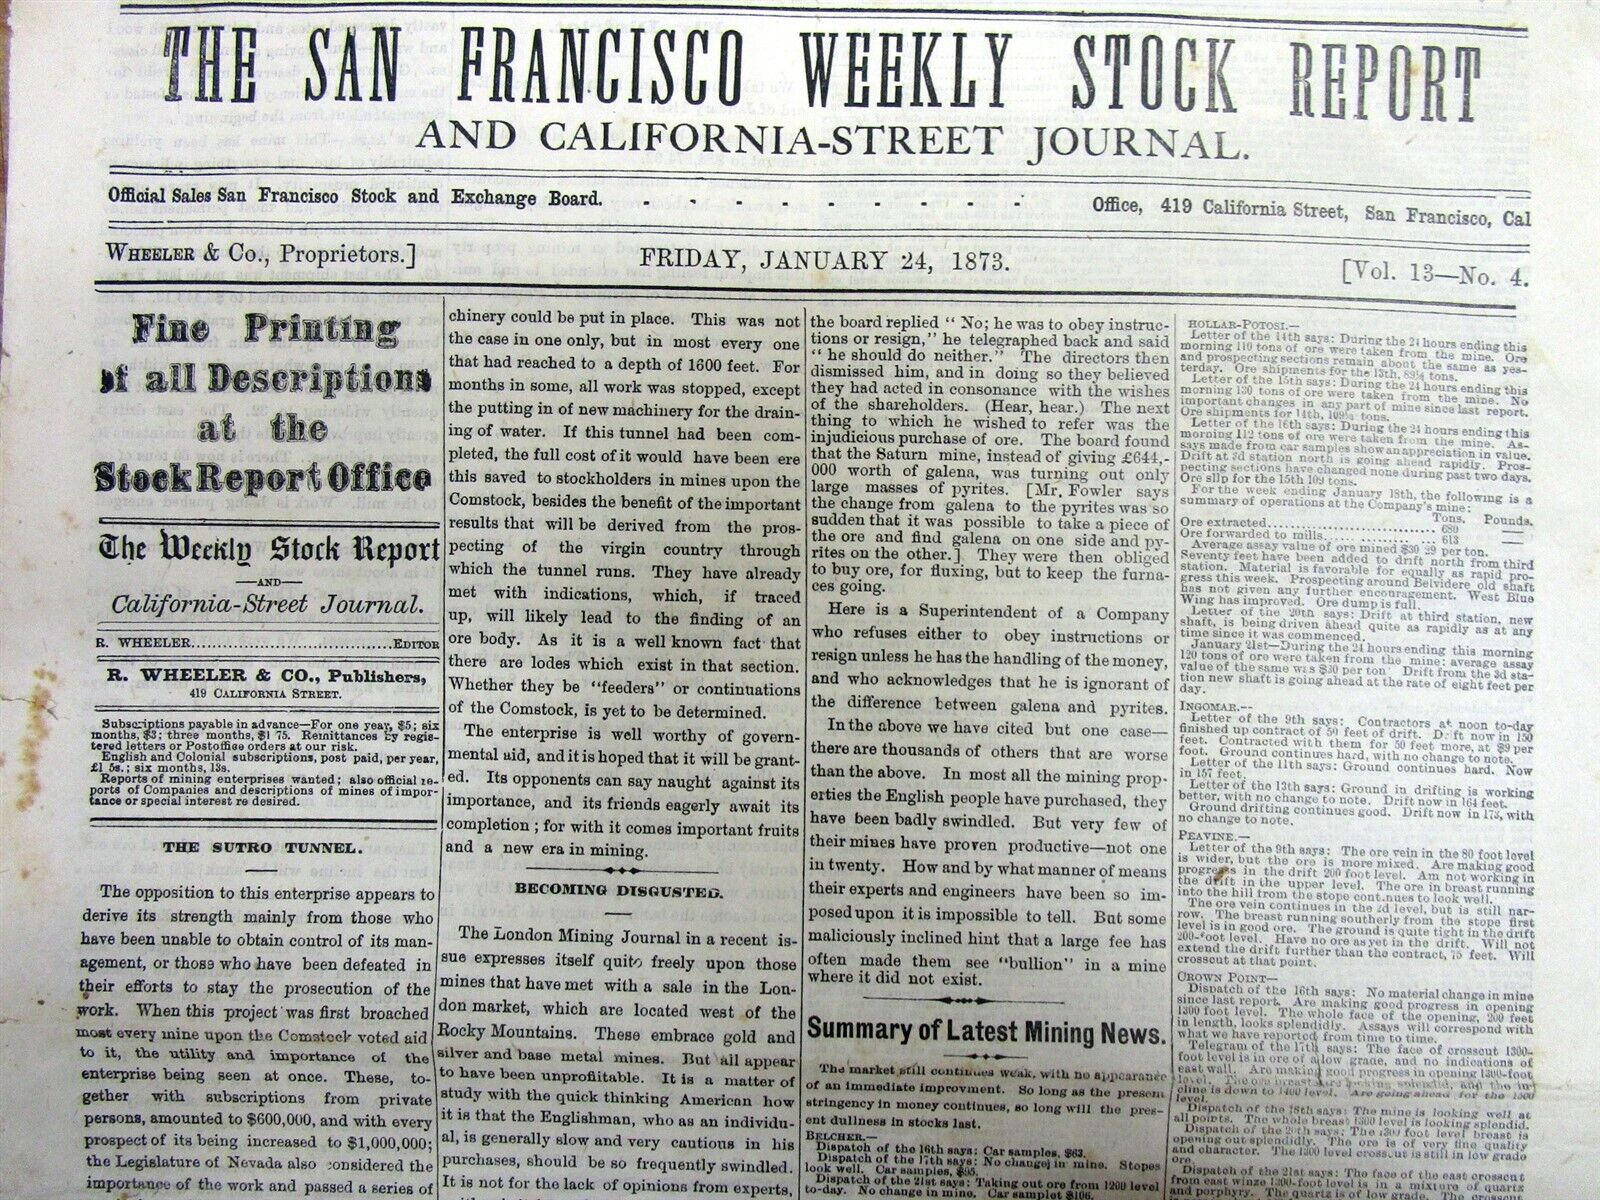 Rare 1873 San Francisco financial newspaper with Discovery of NEVADA SILVER MINE